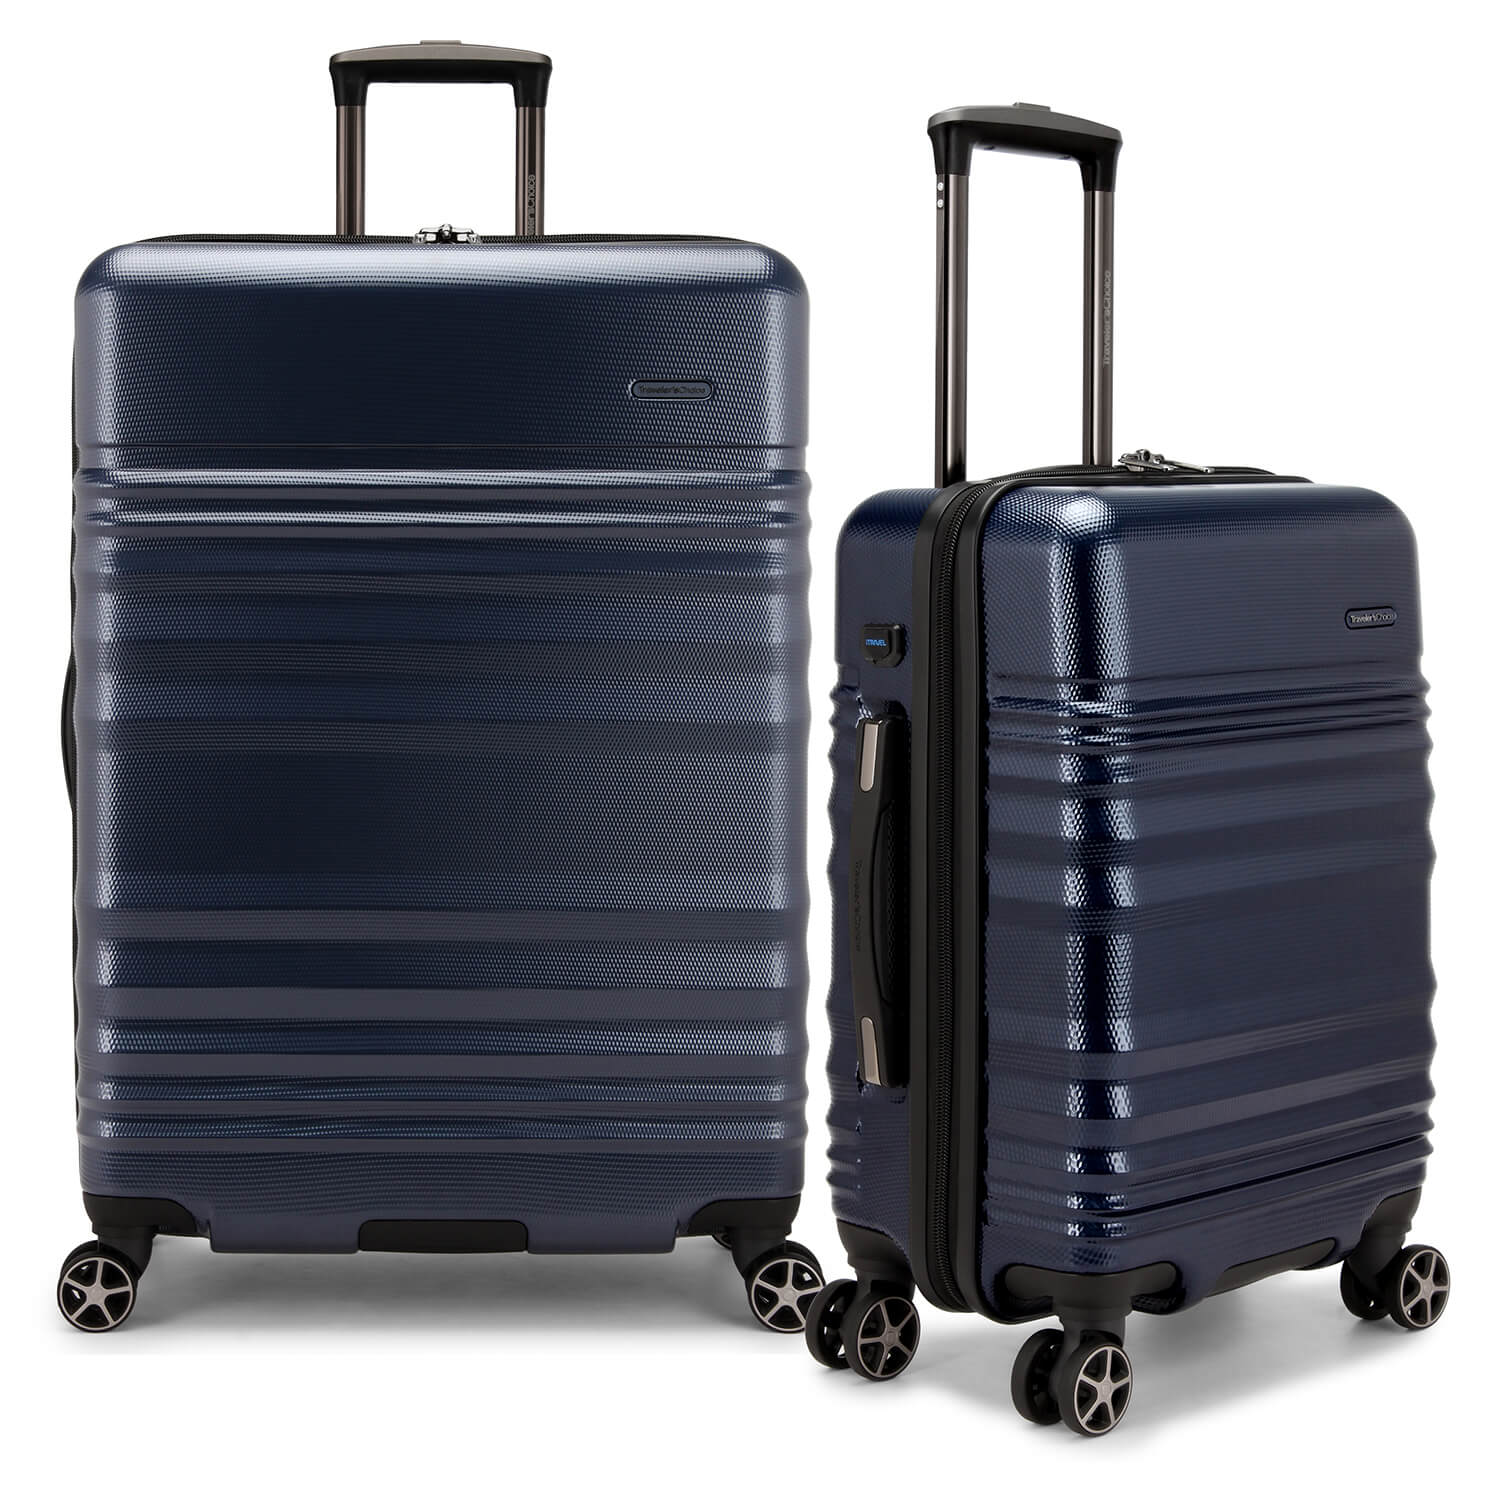 An image of a blue luggage.